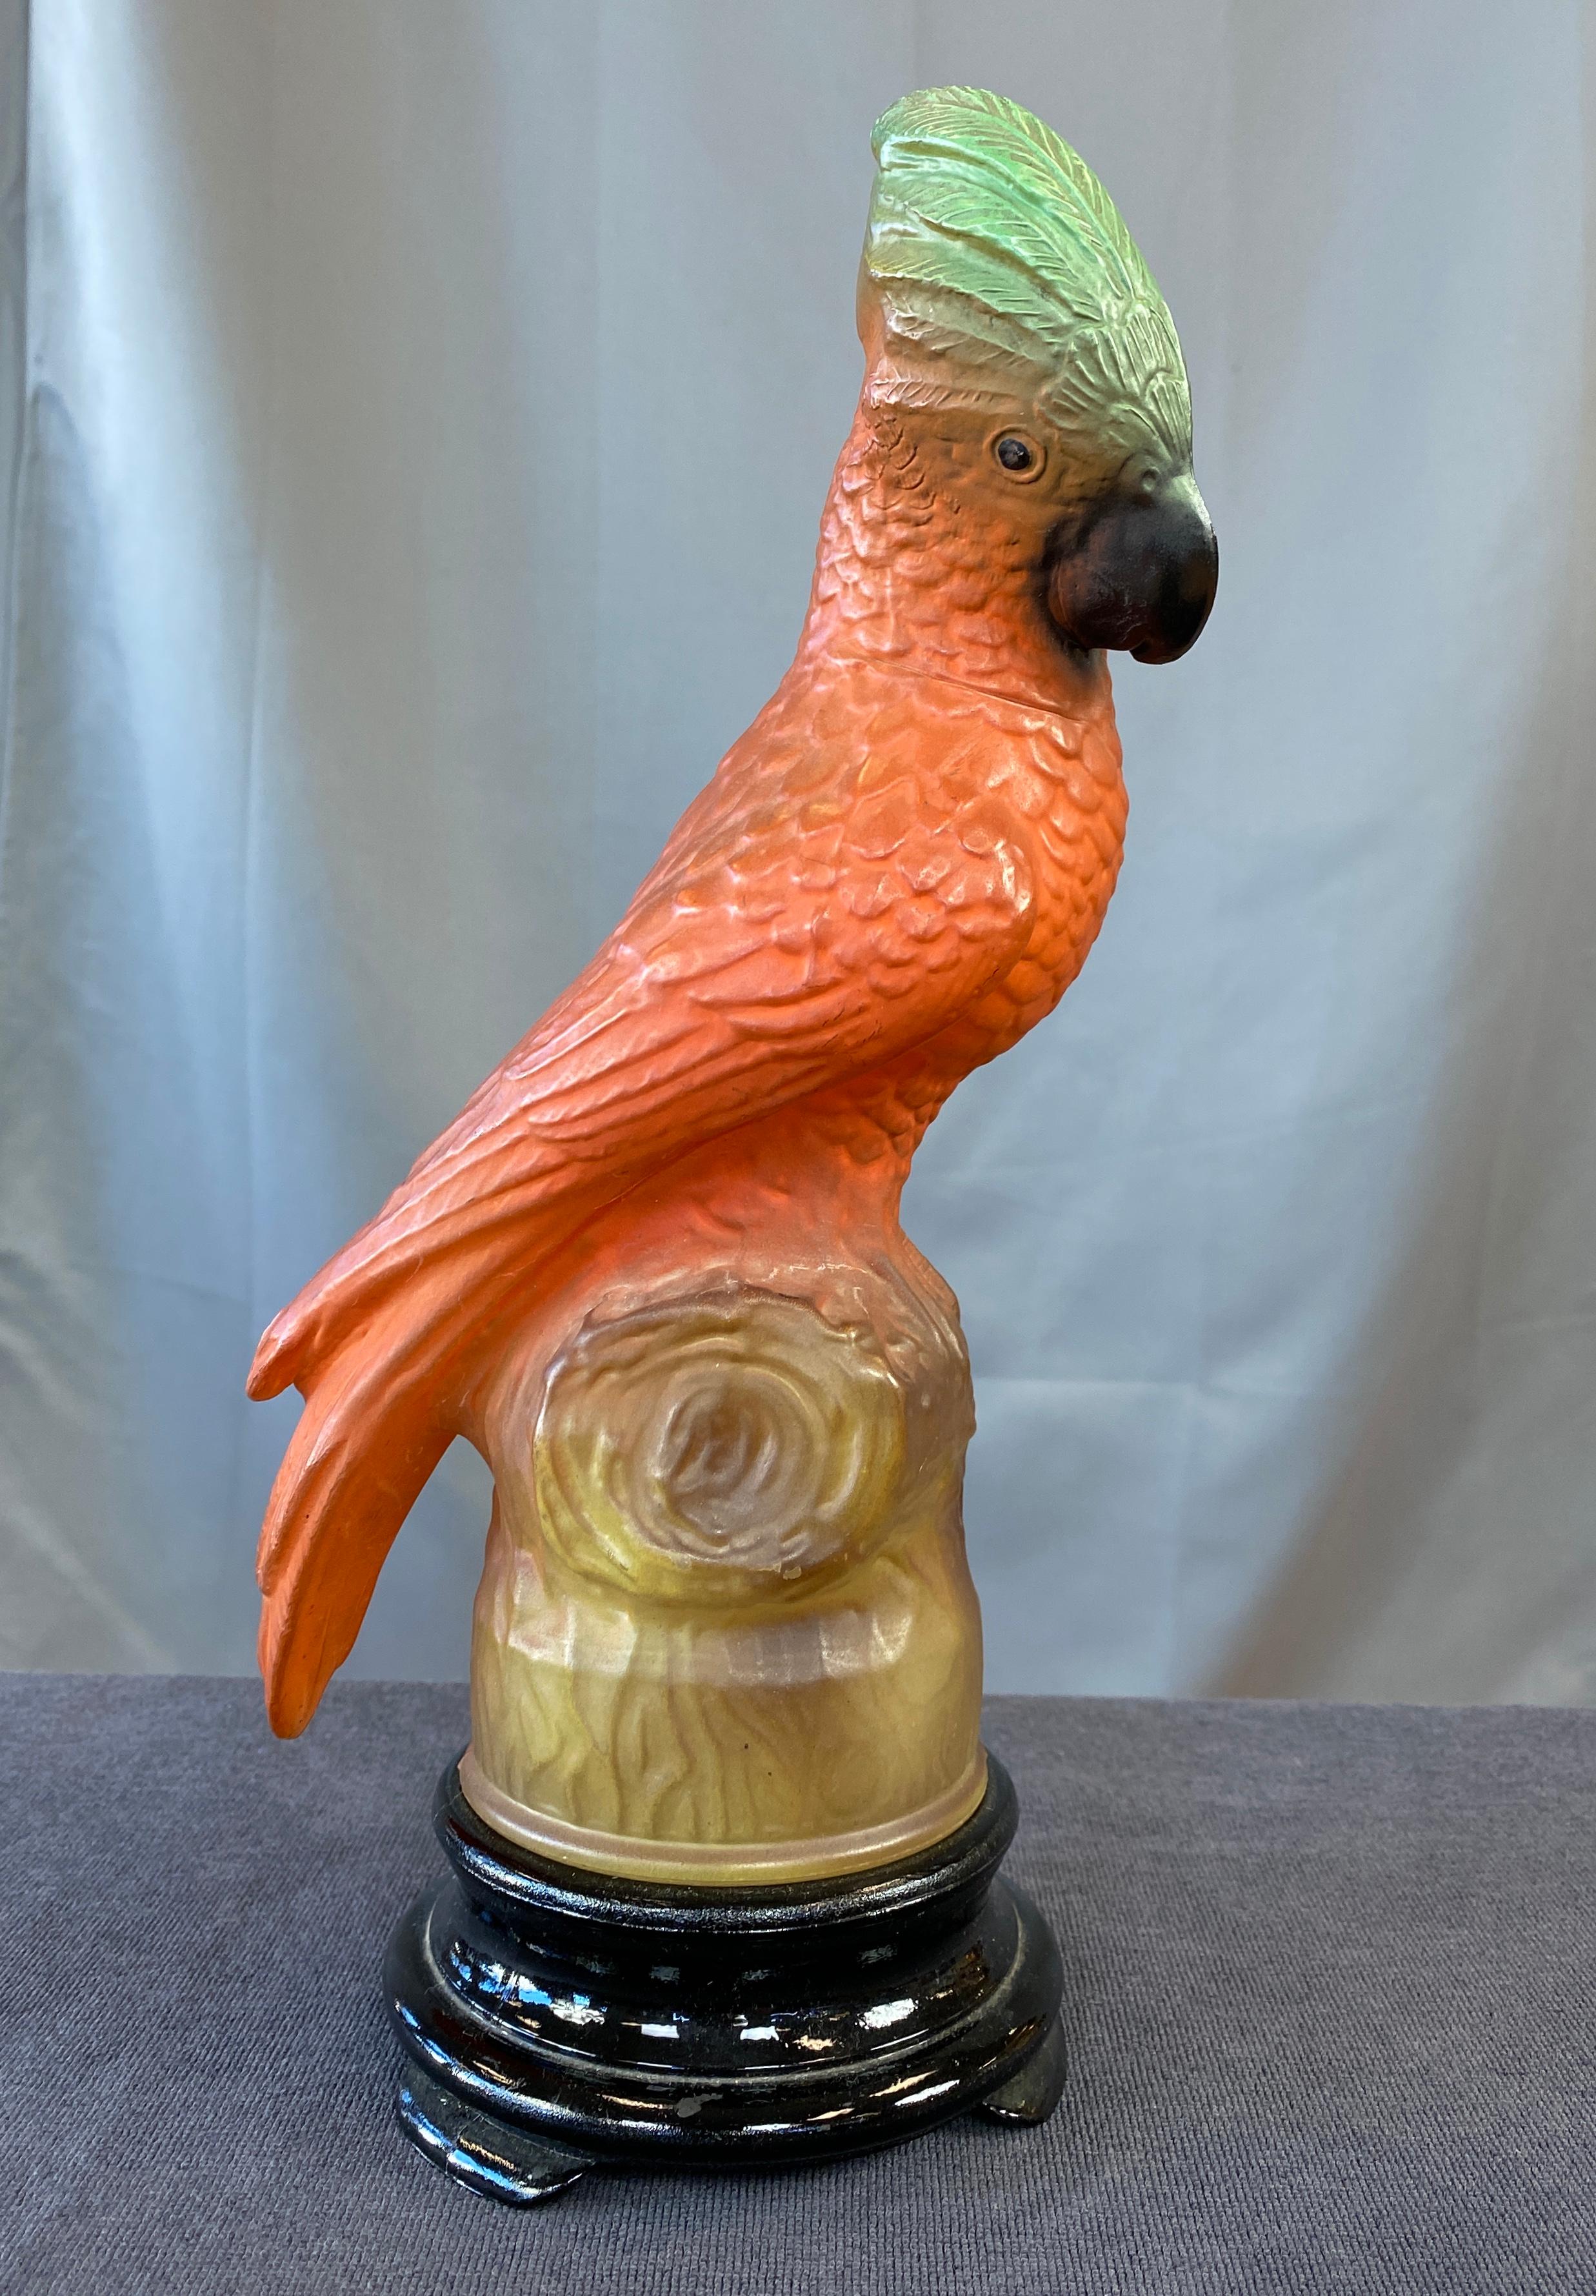 1930s Tiffin glass parrot lamp, The Tiffin Glass Company was based in Steubenville, Ohio
it stands on a black glass base, unscrew the two, to install thew bulb. Lamp has a new black cloth cord.